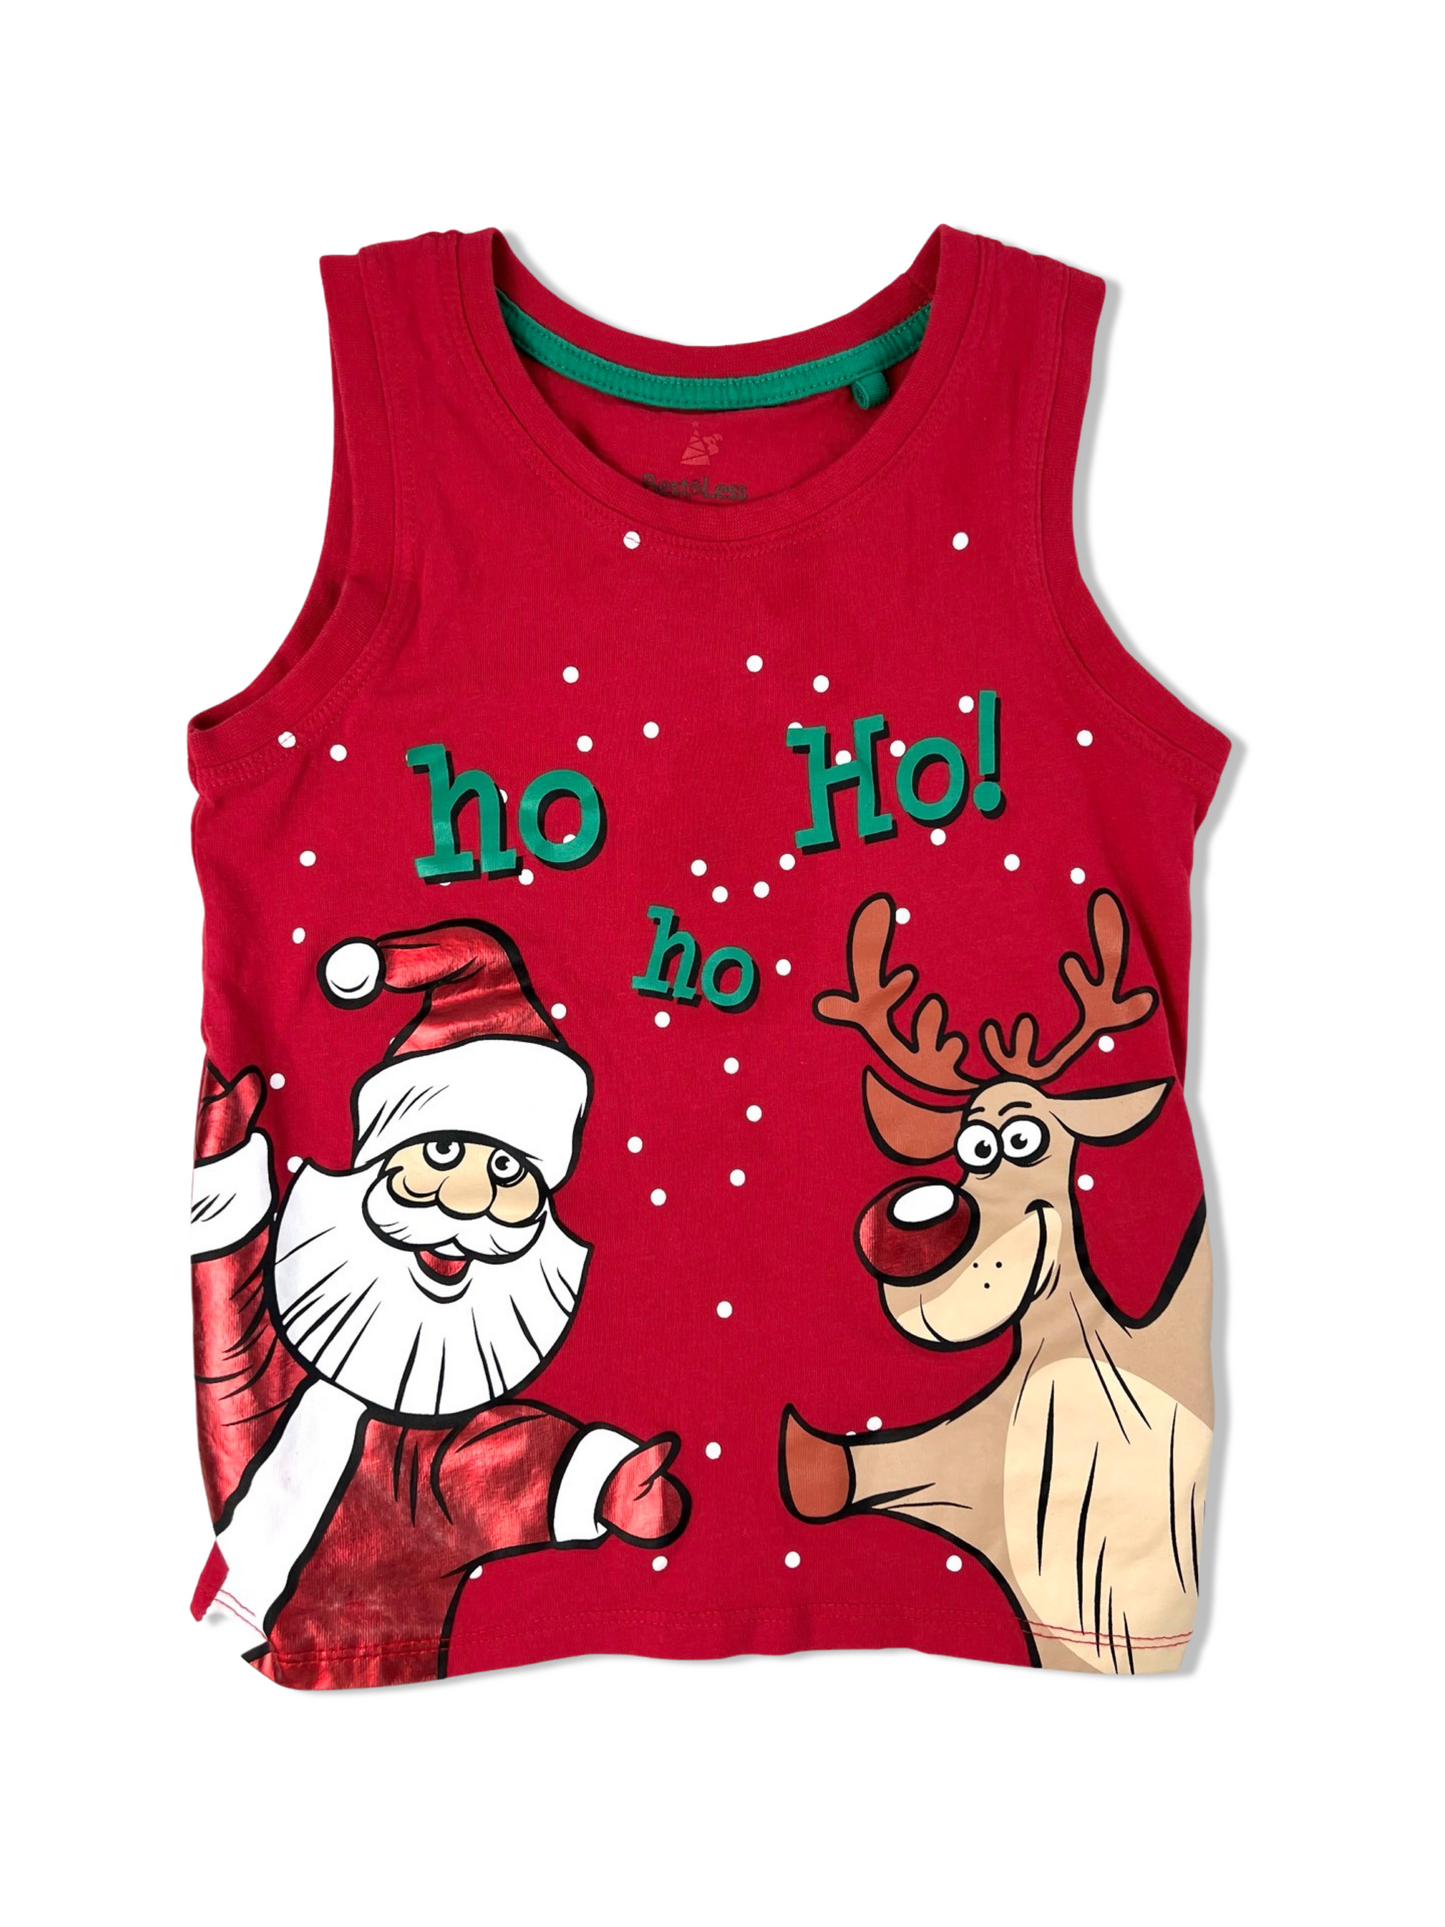 Best & Less Red Christmas Tank - Size 3